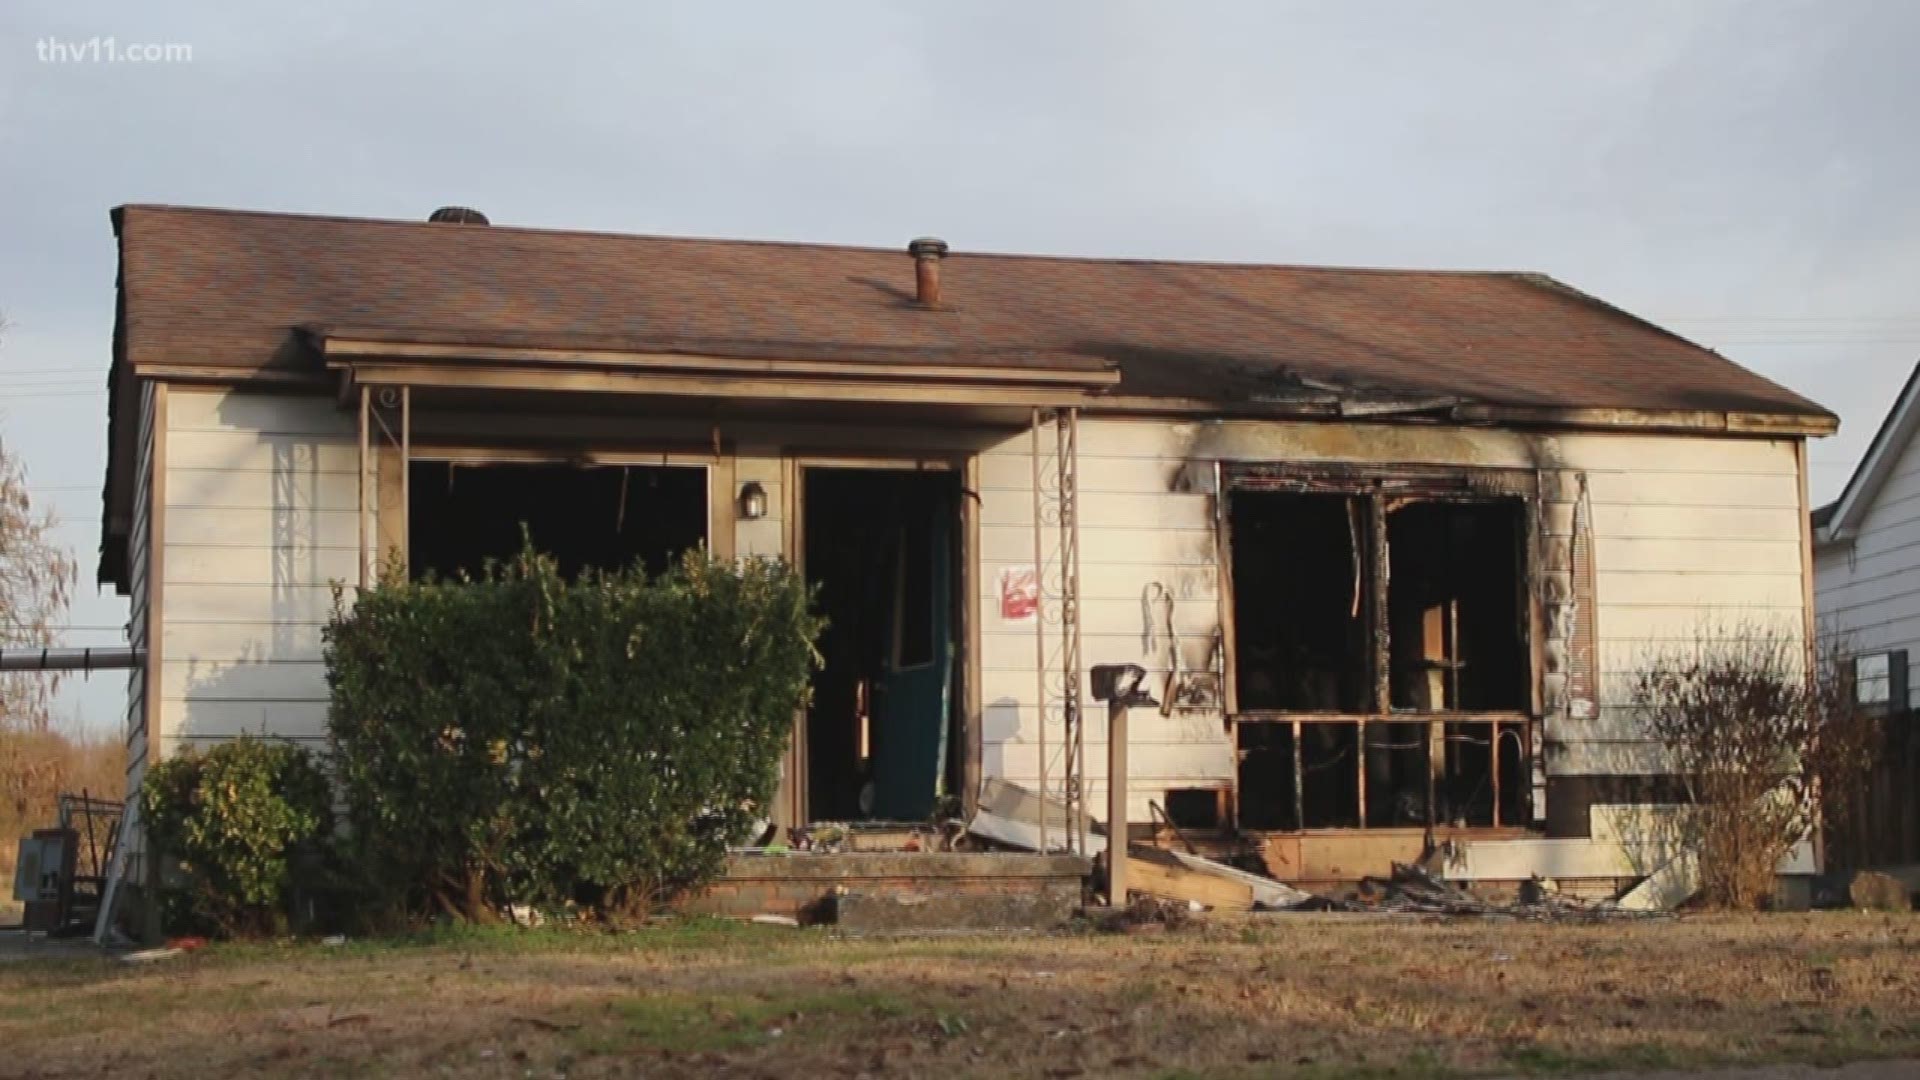 The fire happened on Quillen Avenue last Saturday around 2 in the morning.